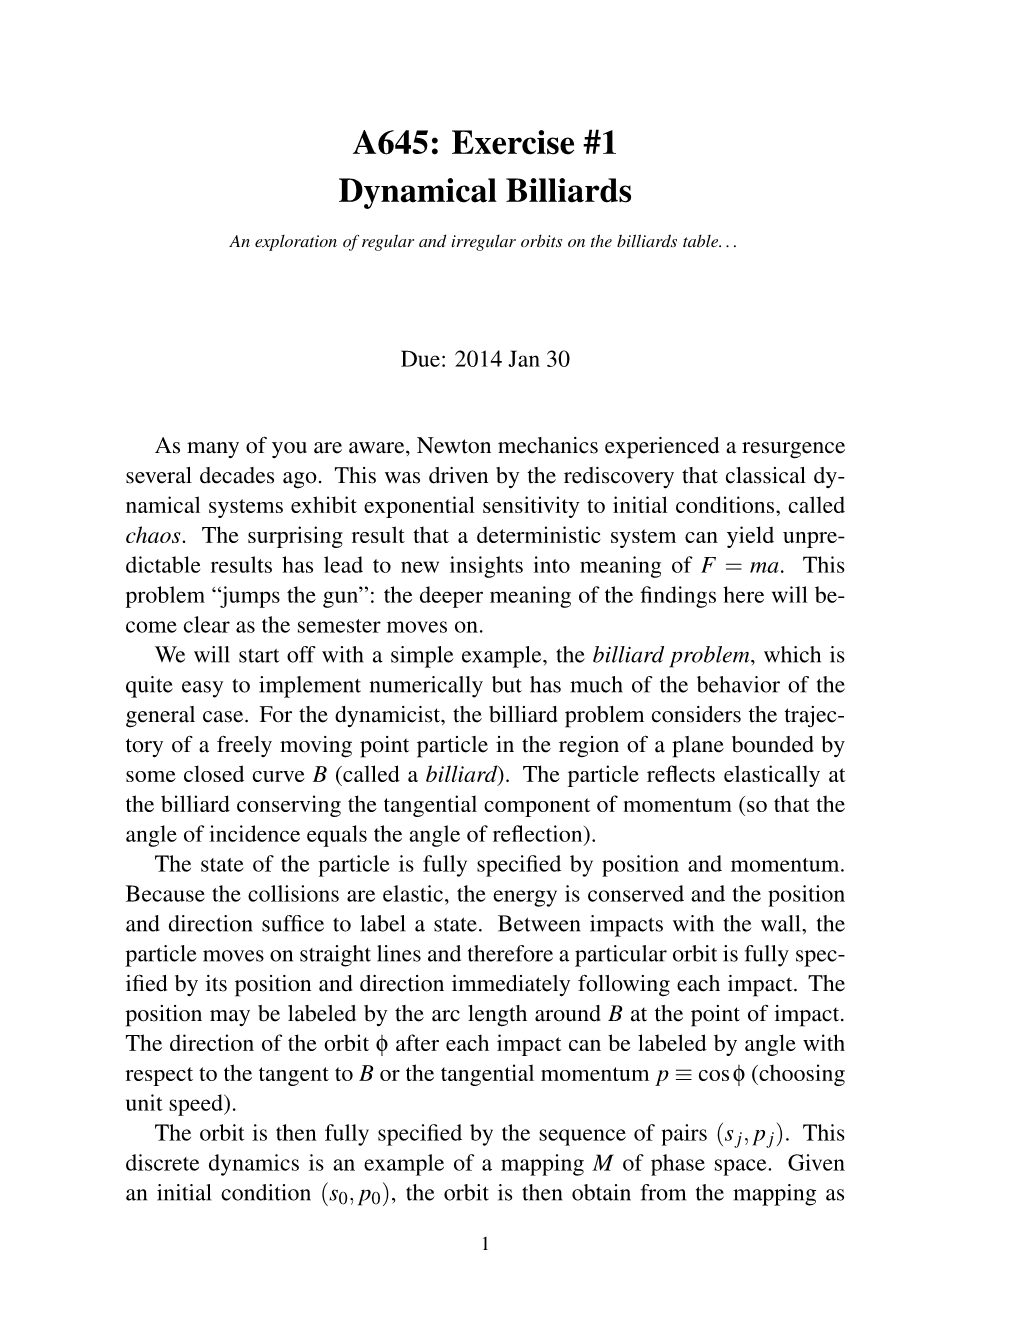 A645: Exercise #1 Dynamical Billiards